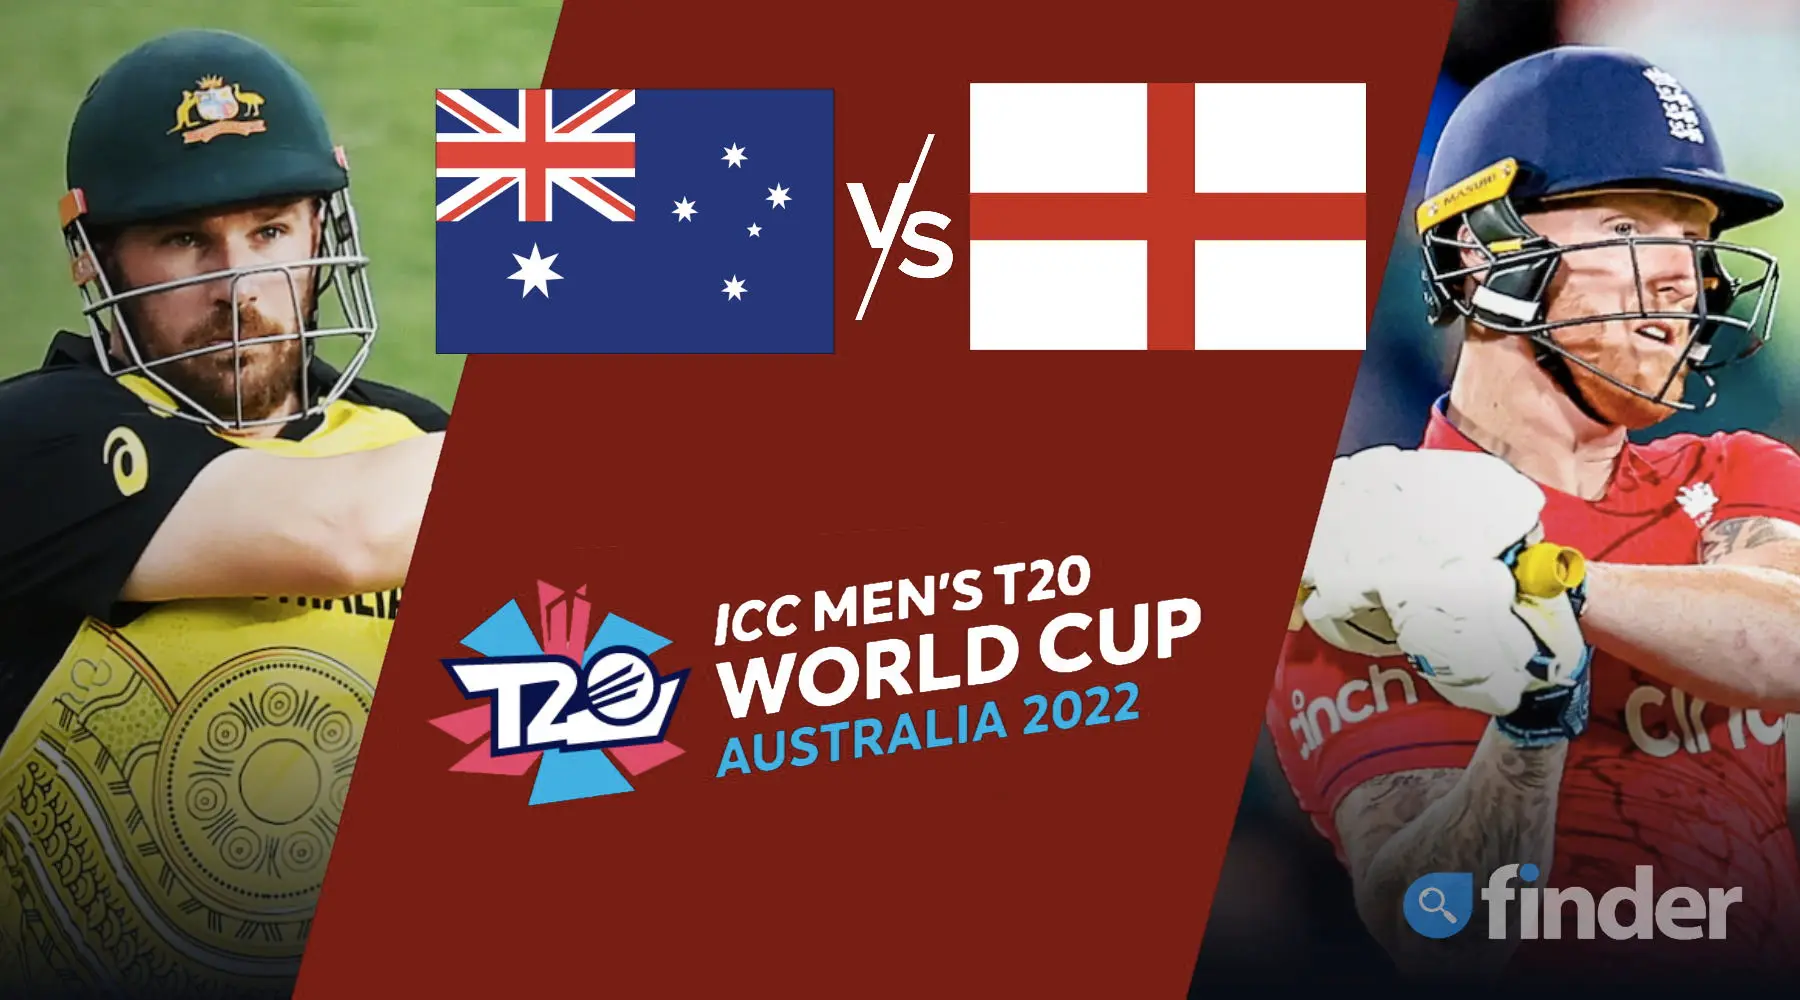 AUS vs ENG How to watch T20 World Cup cricket match live in Australia